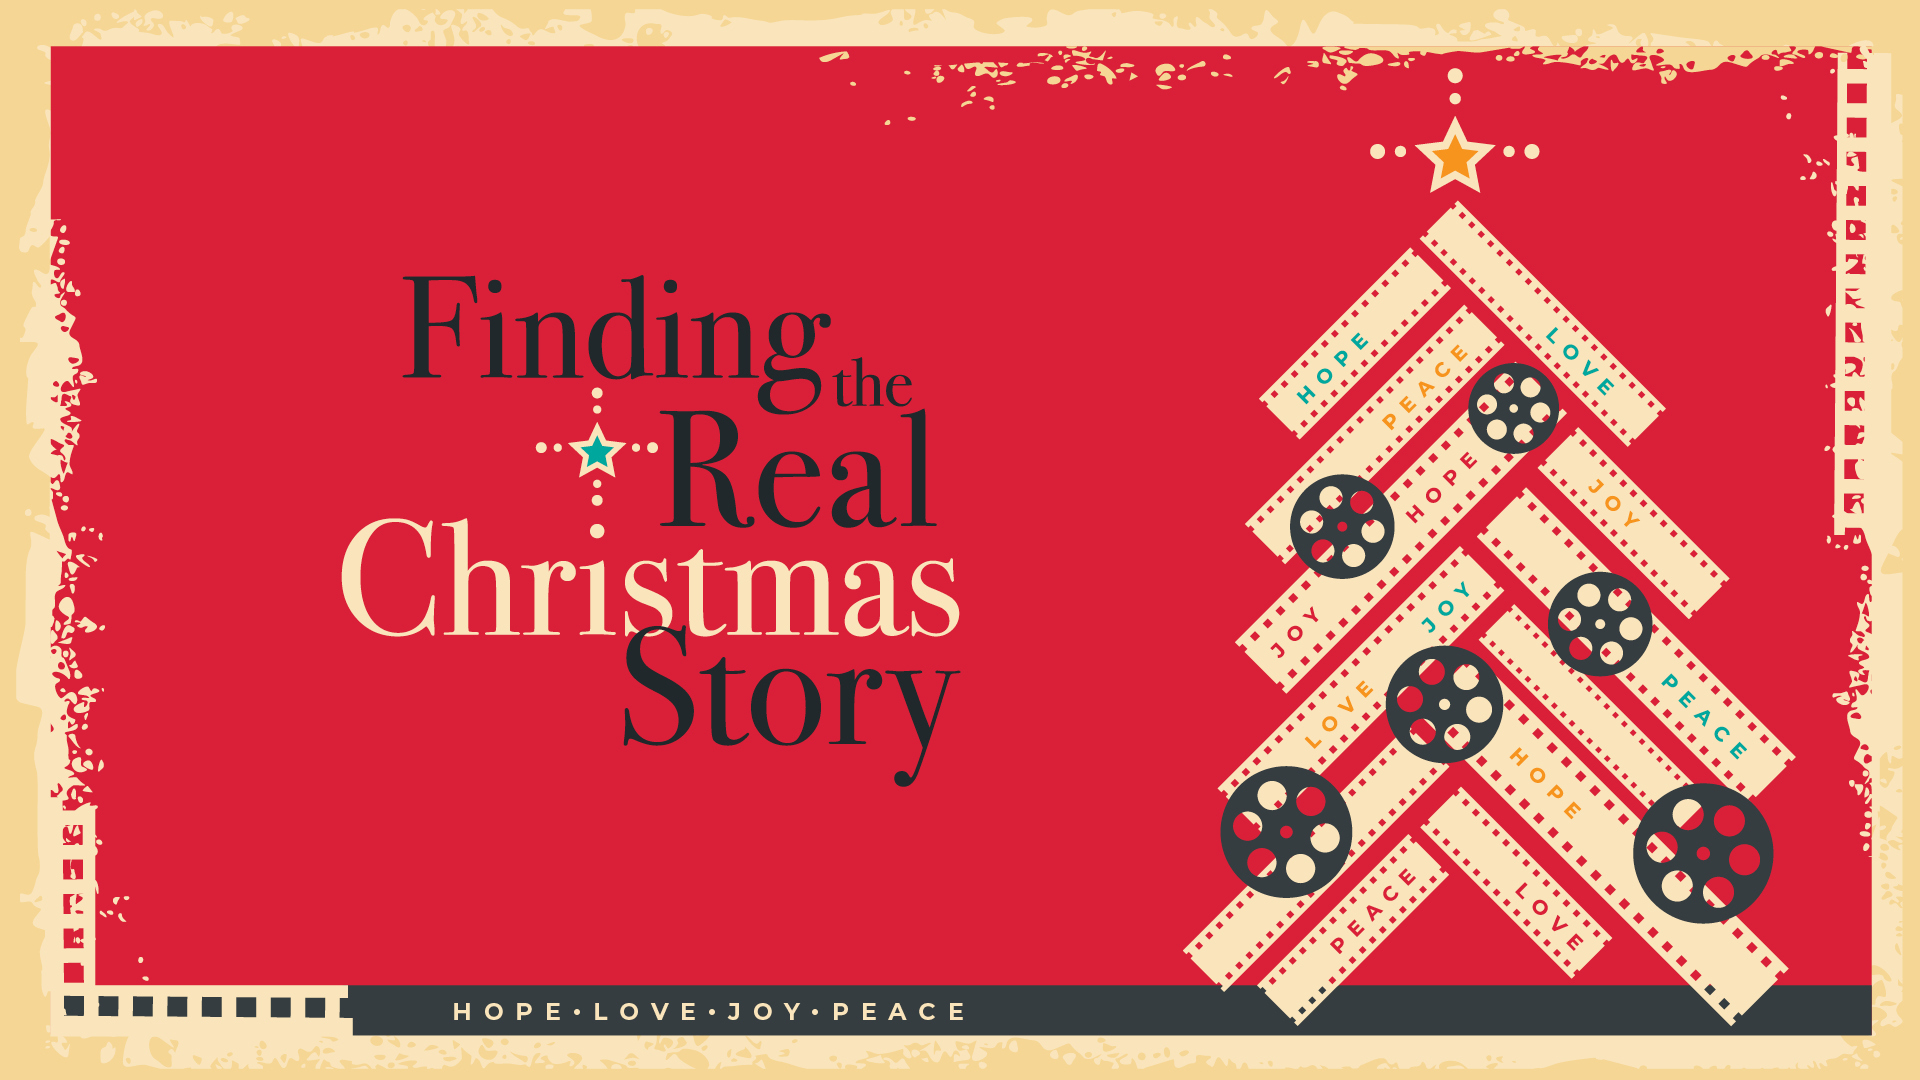 It's A Wonderful Life: Finding the Gift of Peace